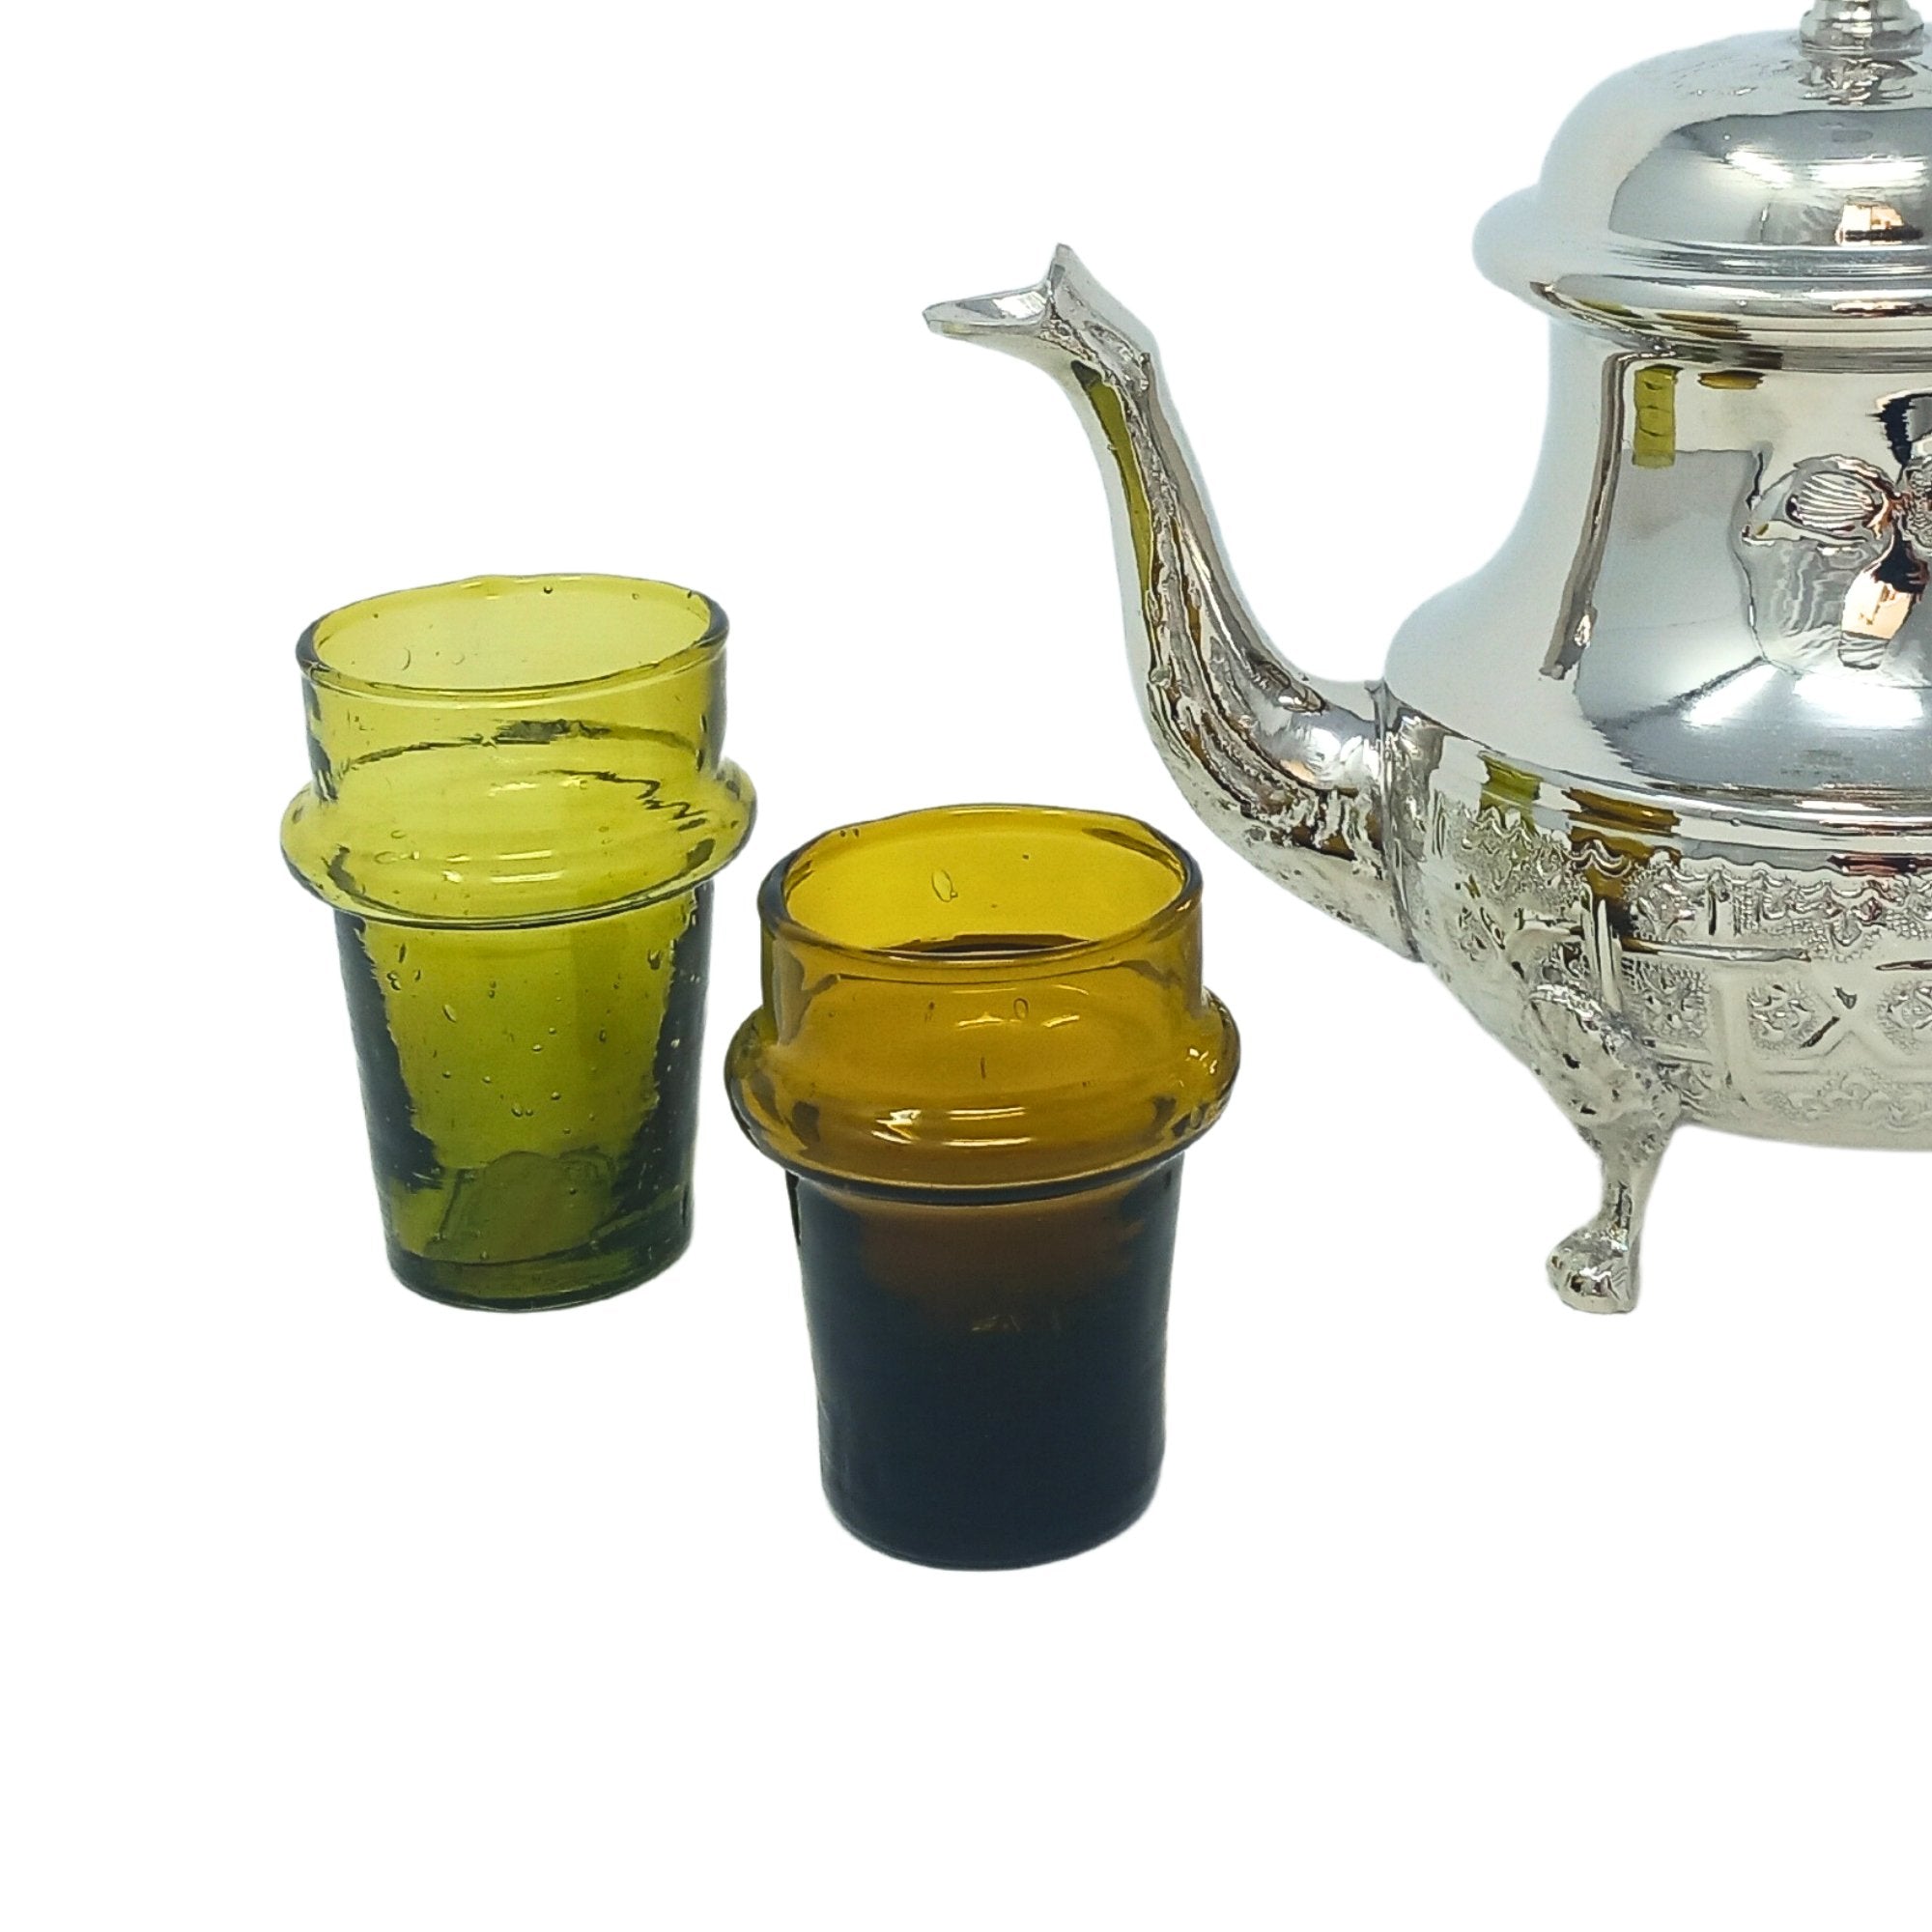 Brown Tea Serving Moroccan Drinking Glasses Recycled - Artisan Stories